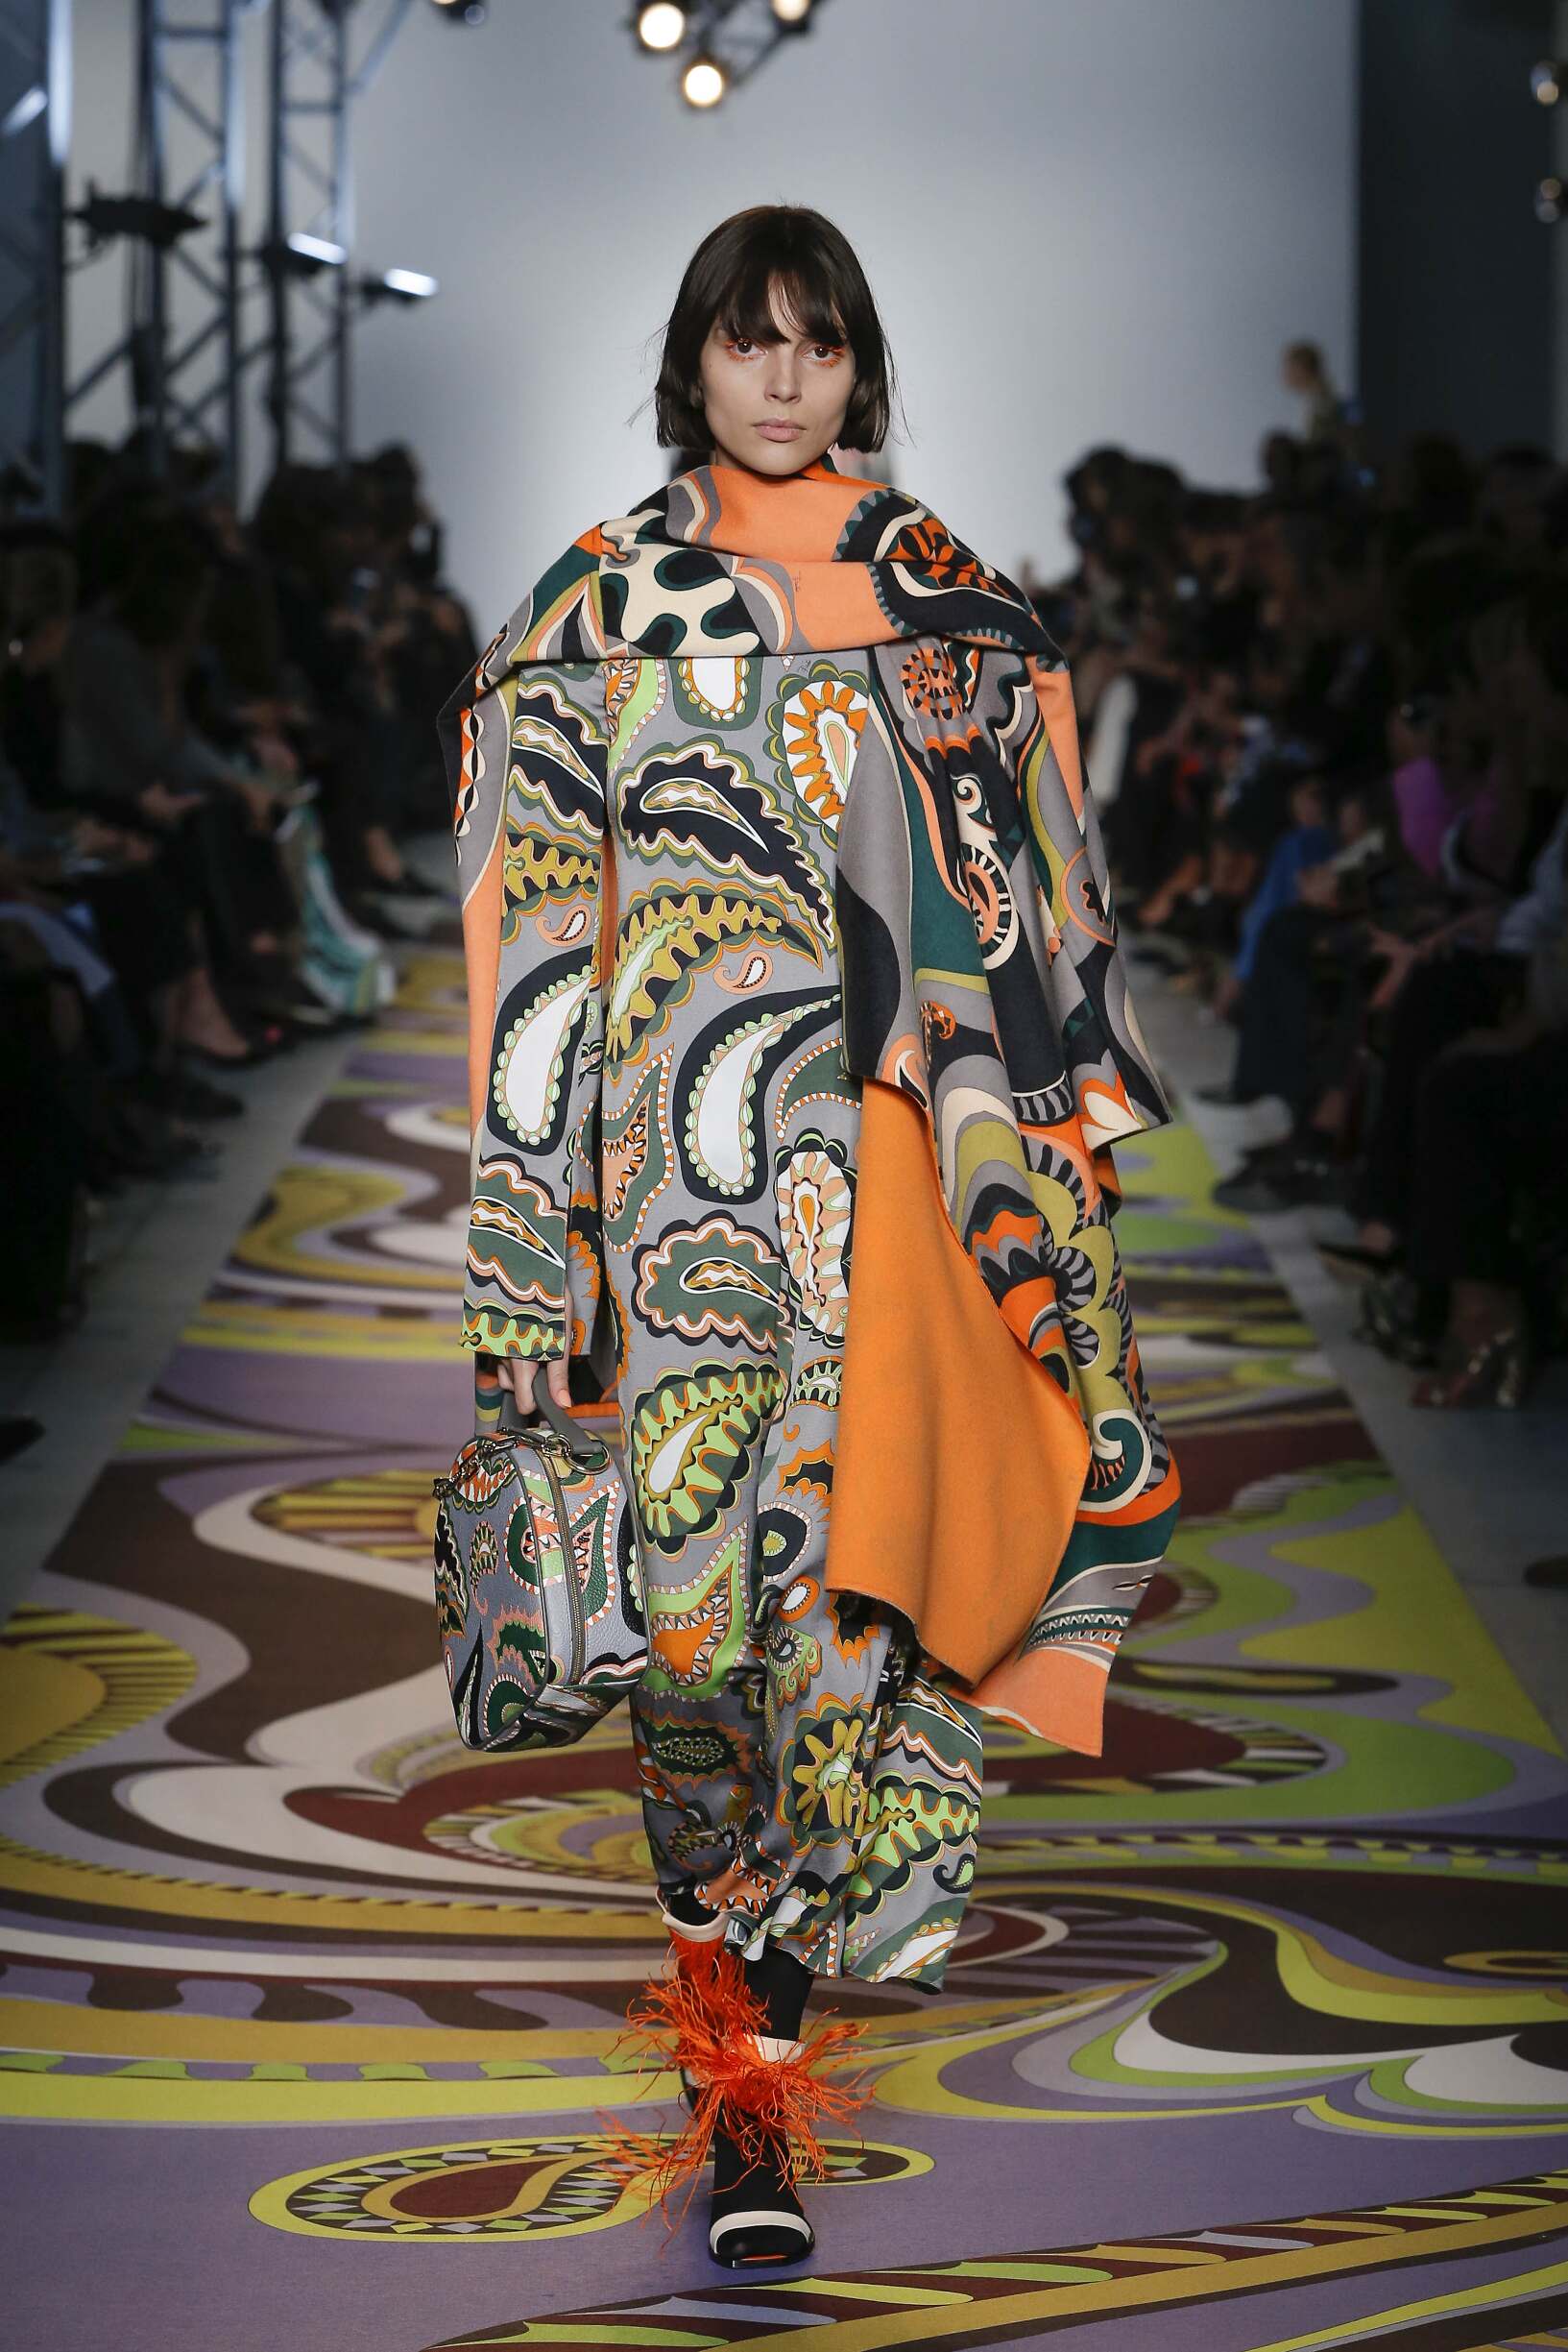 EMILIO PUCCI FALL WINTER 2017-18 WOMEN'S COLLECTION | The Skinny Beep